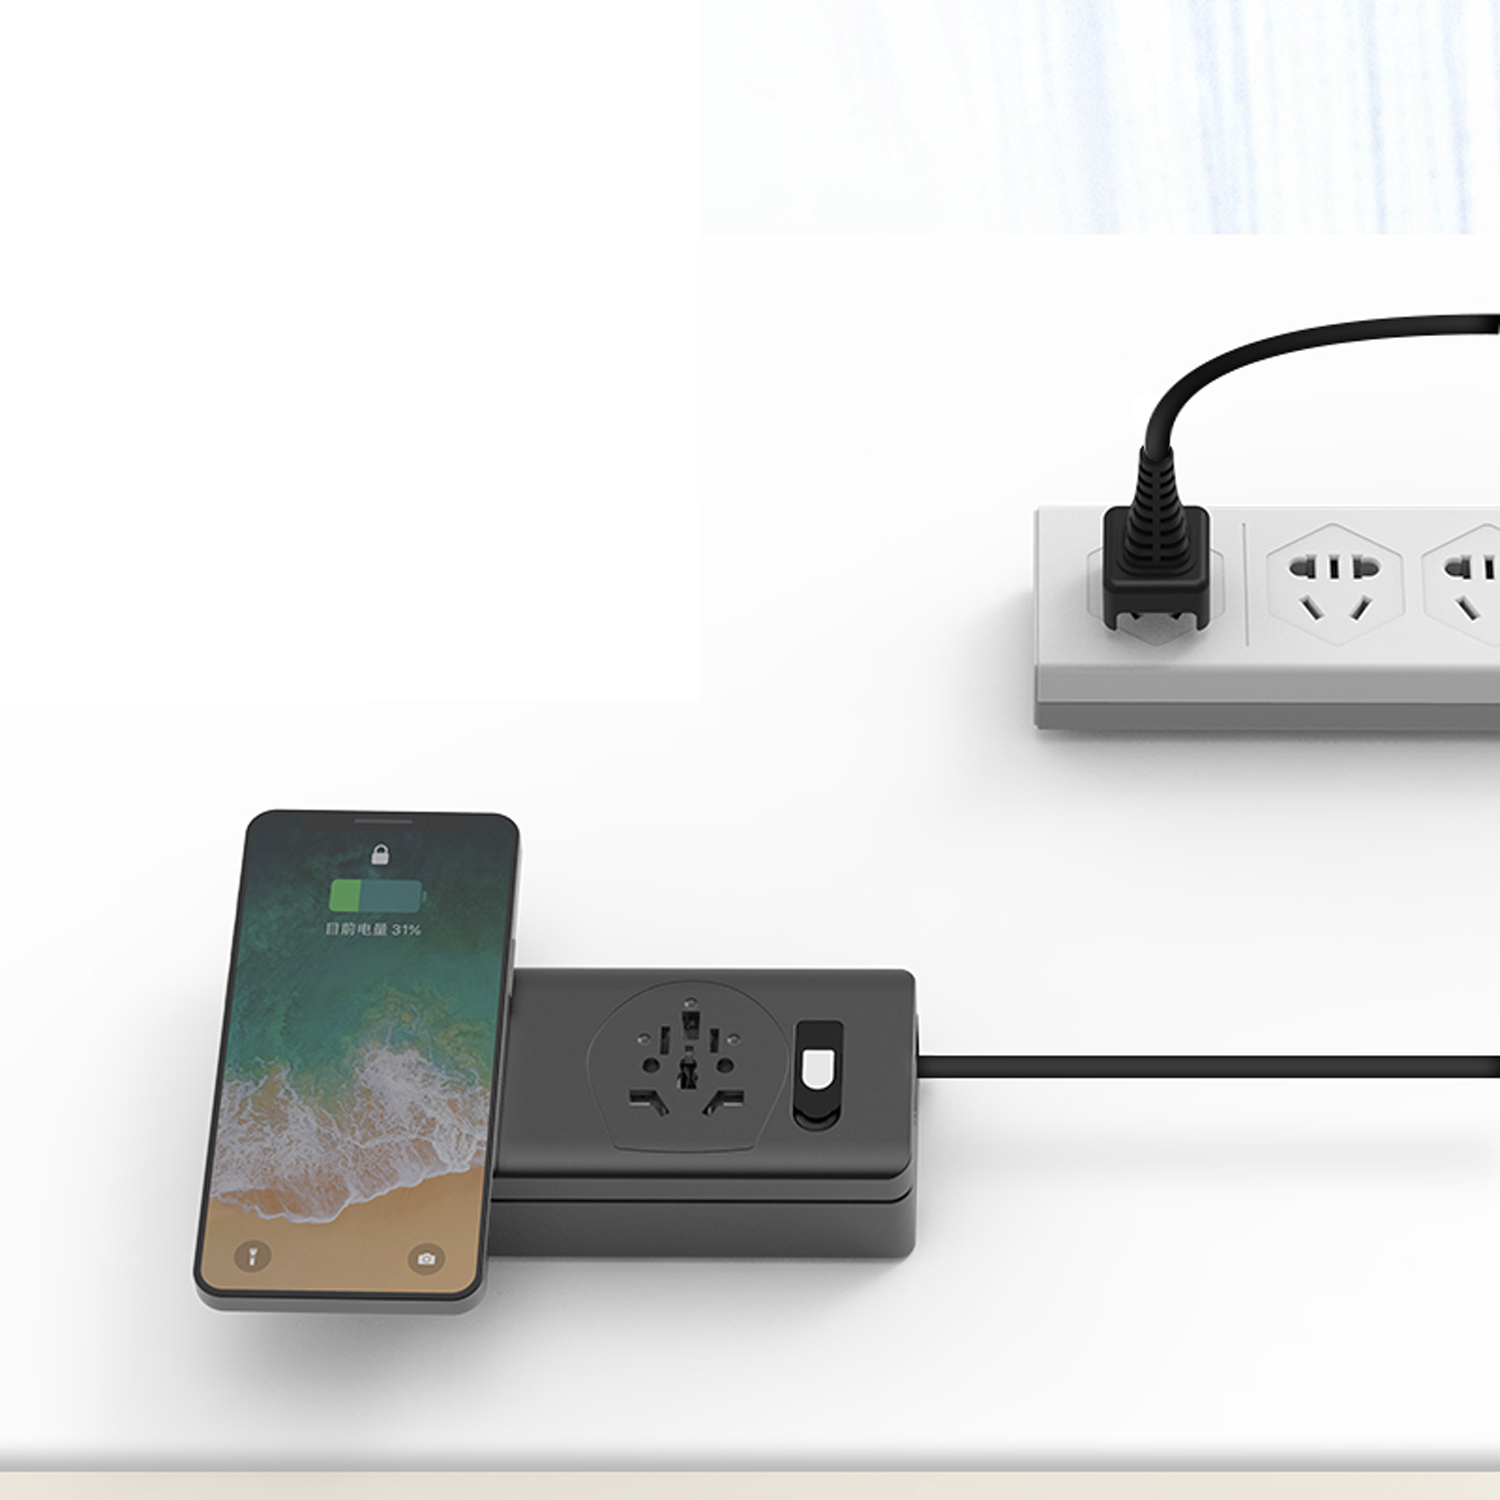 USB-C docking station socket with wireless charger (1)